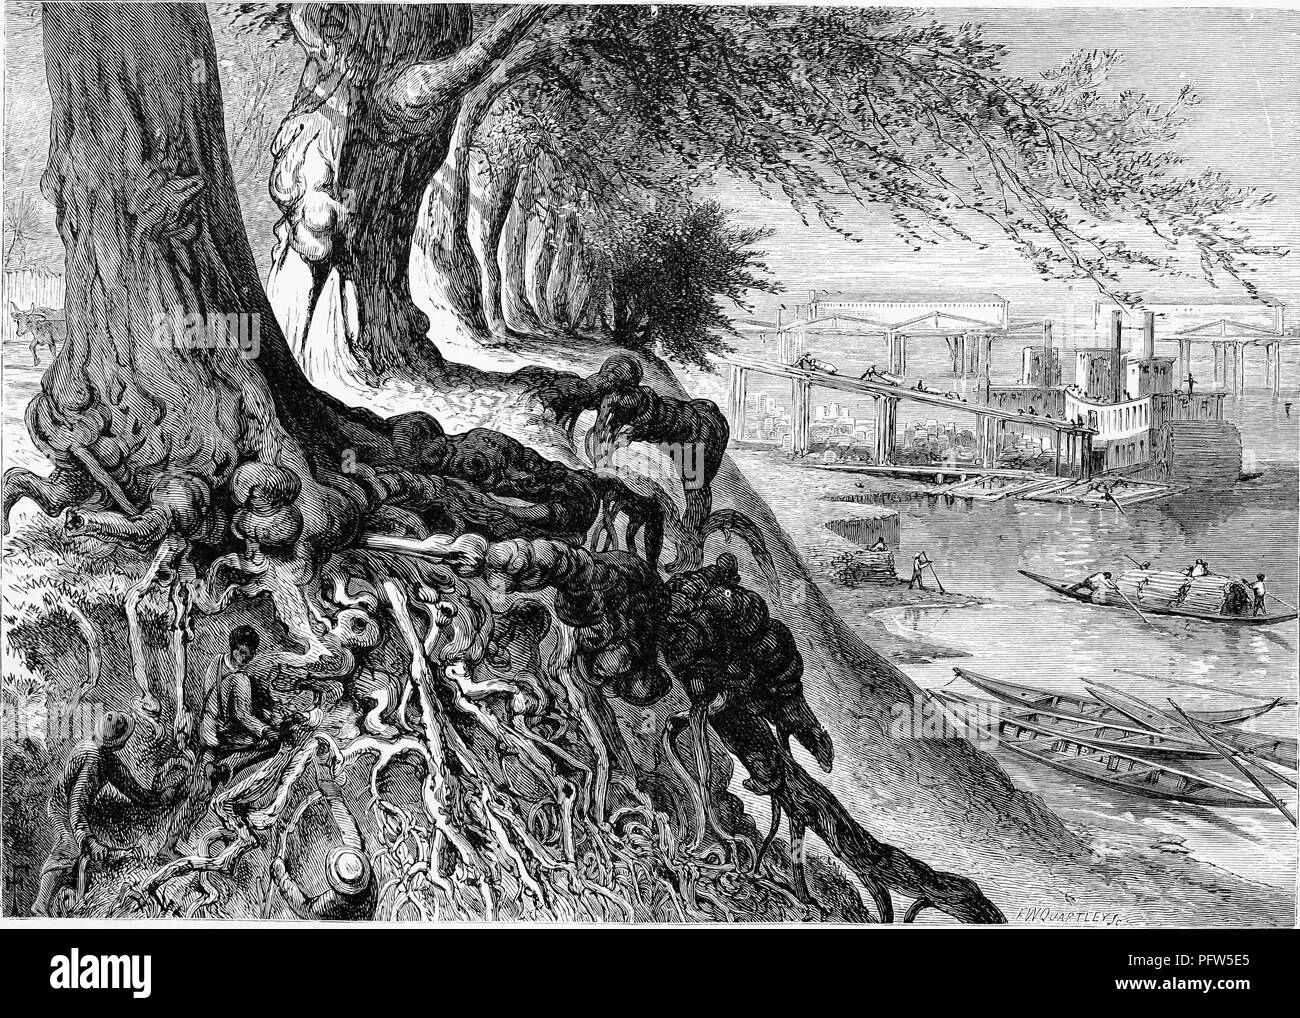 Black and a white vintage print depicting people sitting in and climbing on the roots of a great tree on a riverbank in the foreground, with paddleboats or kayaks, and a large steam-powered riverboat being loaded in the background, located on the Savannah River near Augusta, Georgia, and published in William Cullen Bryant's edited volume 'Picturesque America; or, The Land We Live In', 1872. Courtesy Internet Archive. () Stock Photo